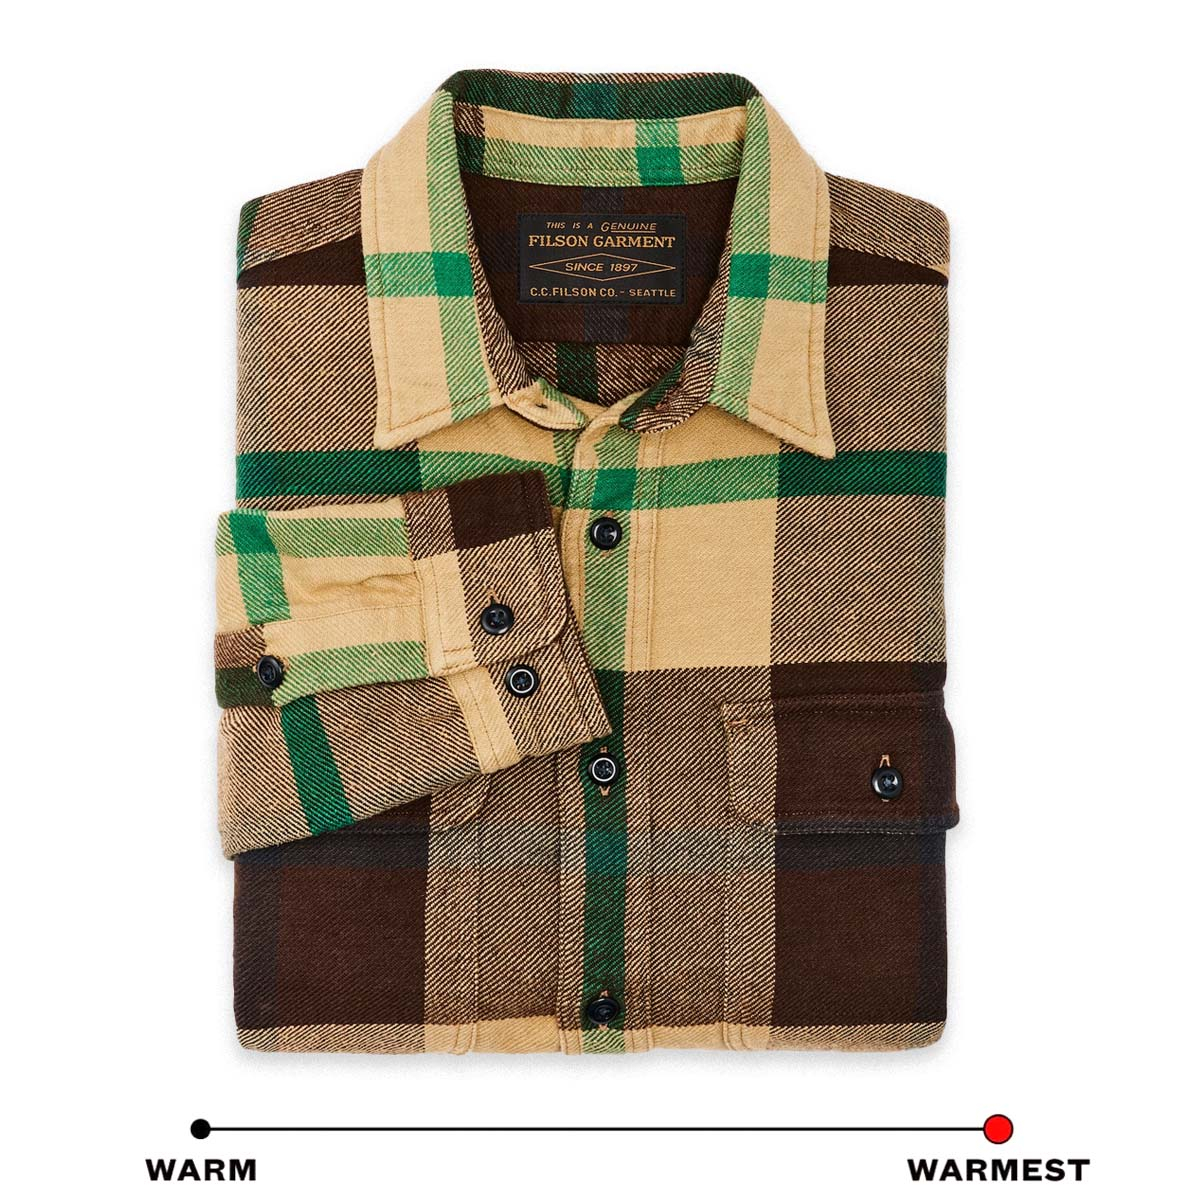 Filson Vintage Flannel Work Shirt Tan Green Coffee, built with thick and breathable cotton flannel, it’s ideal for cold weather